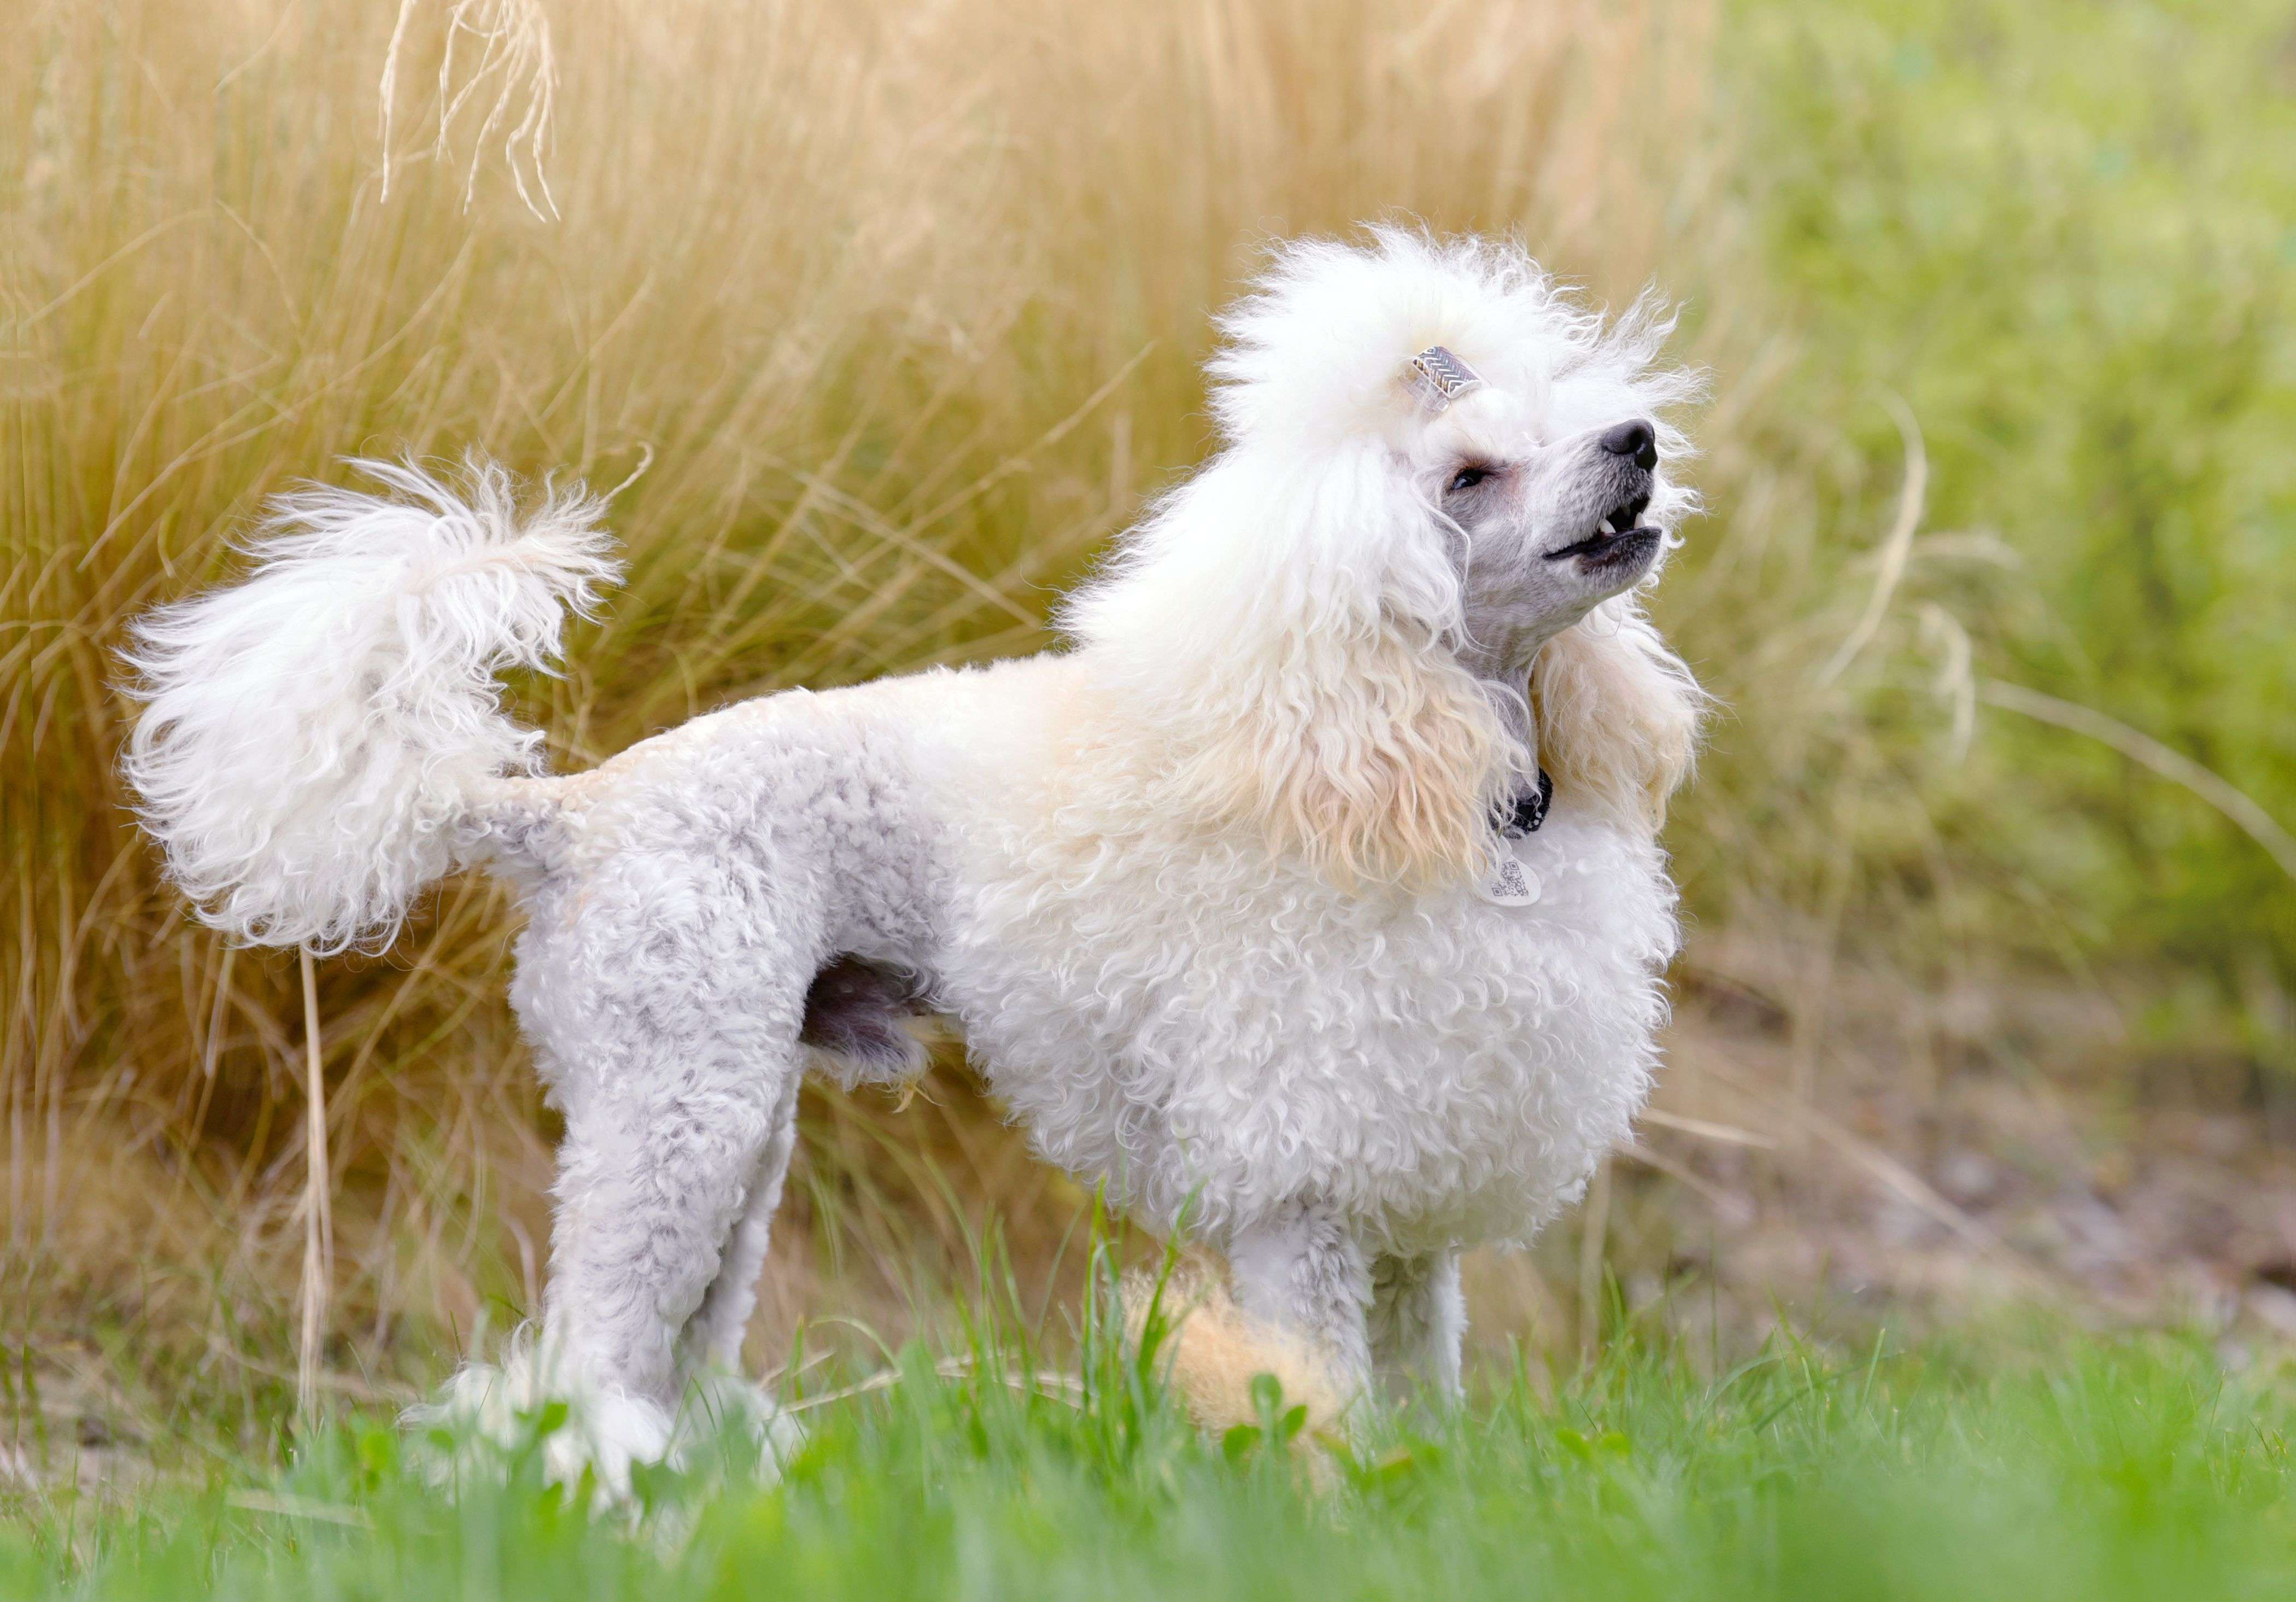 Do Poodles Have Curly Tails